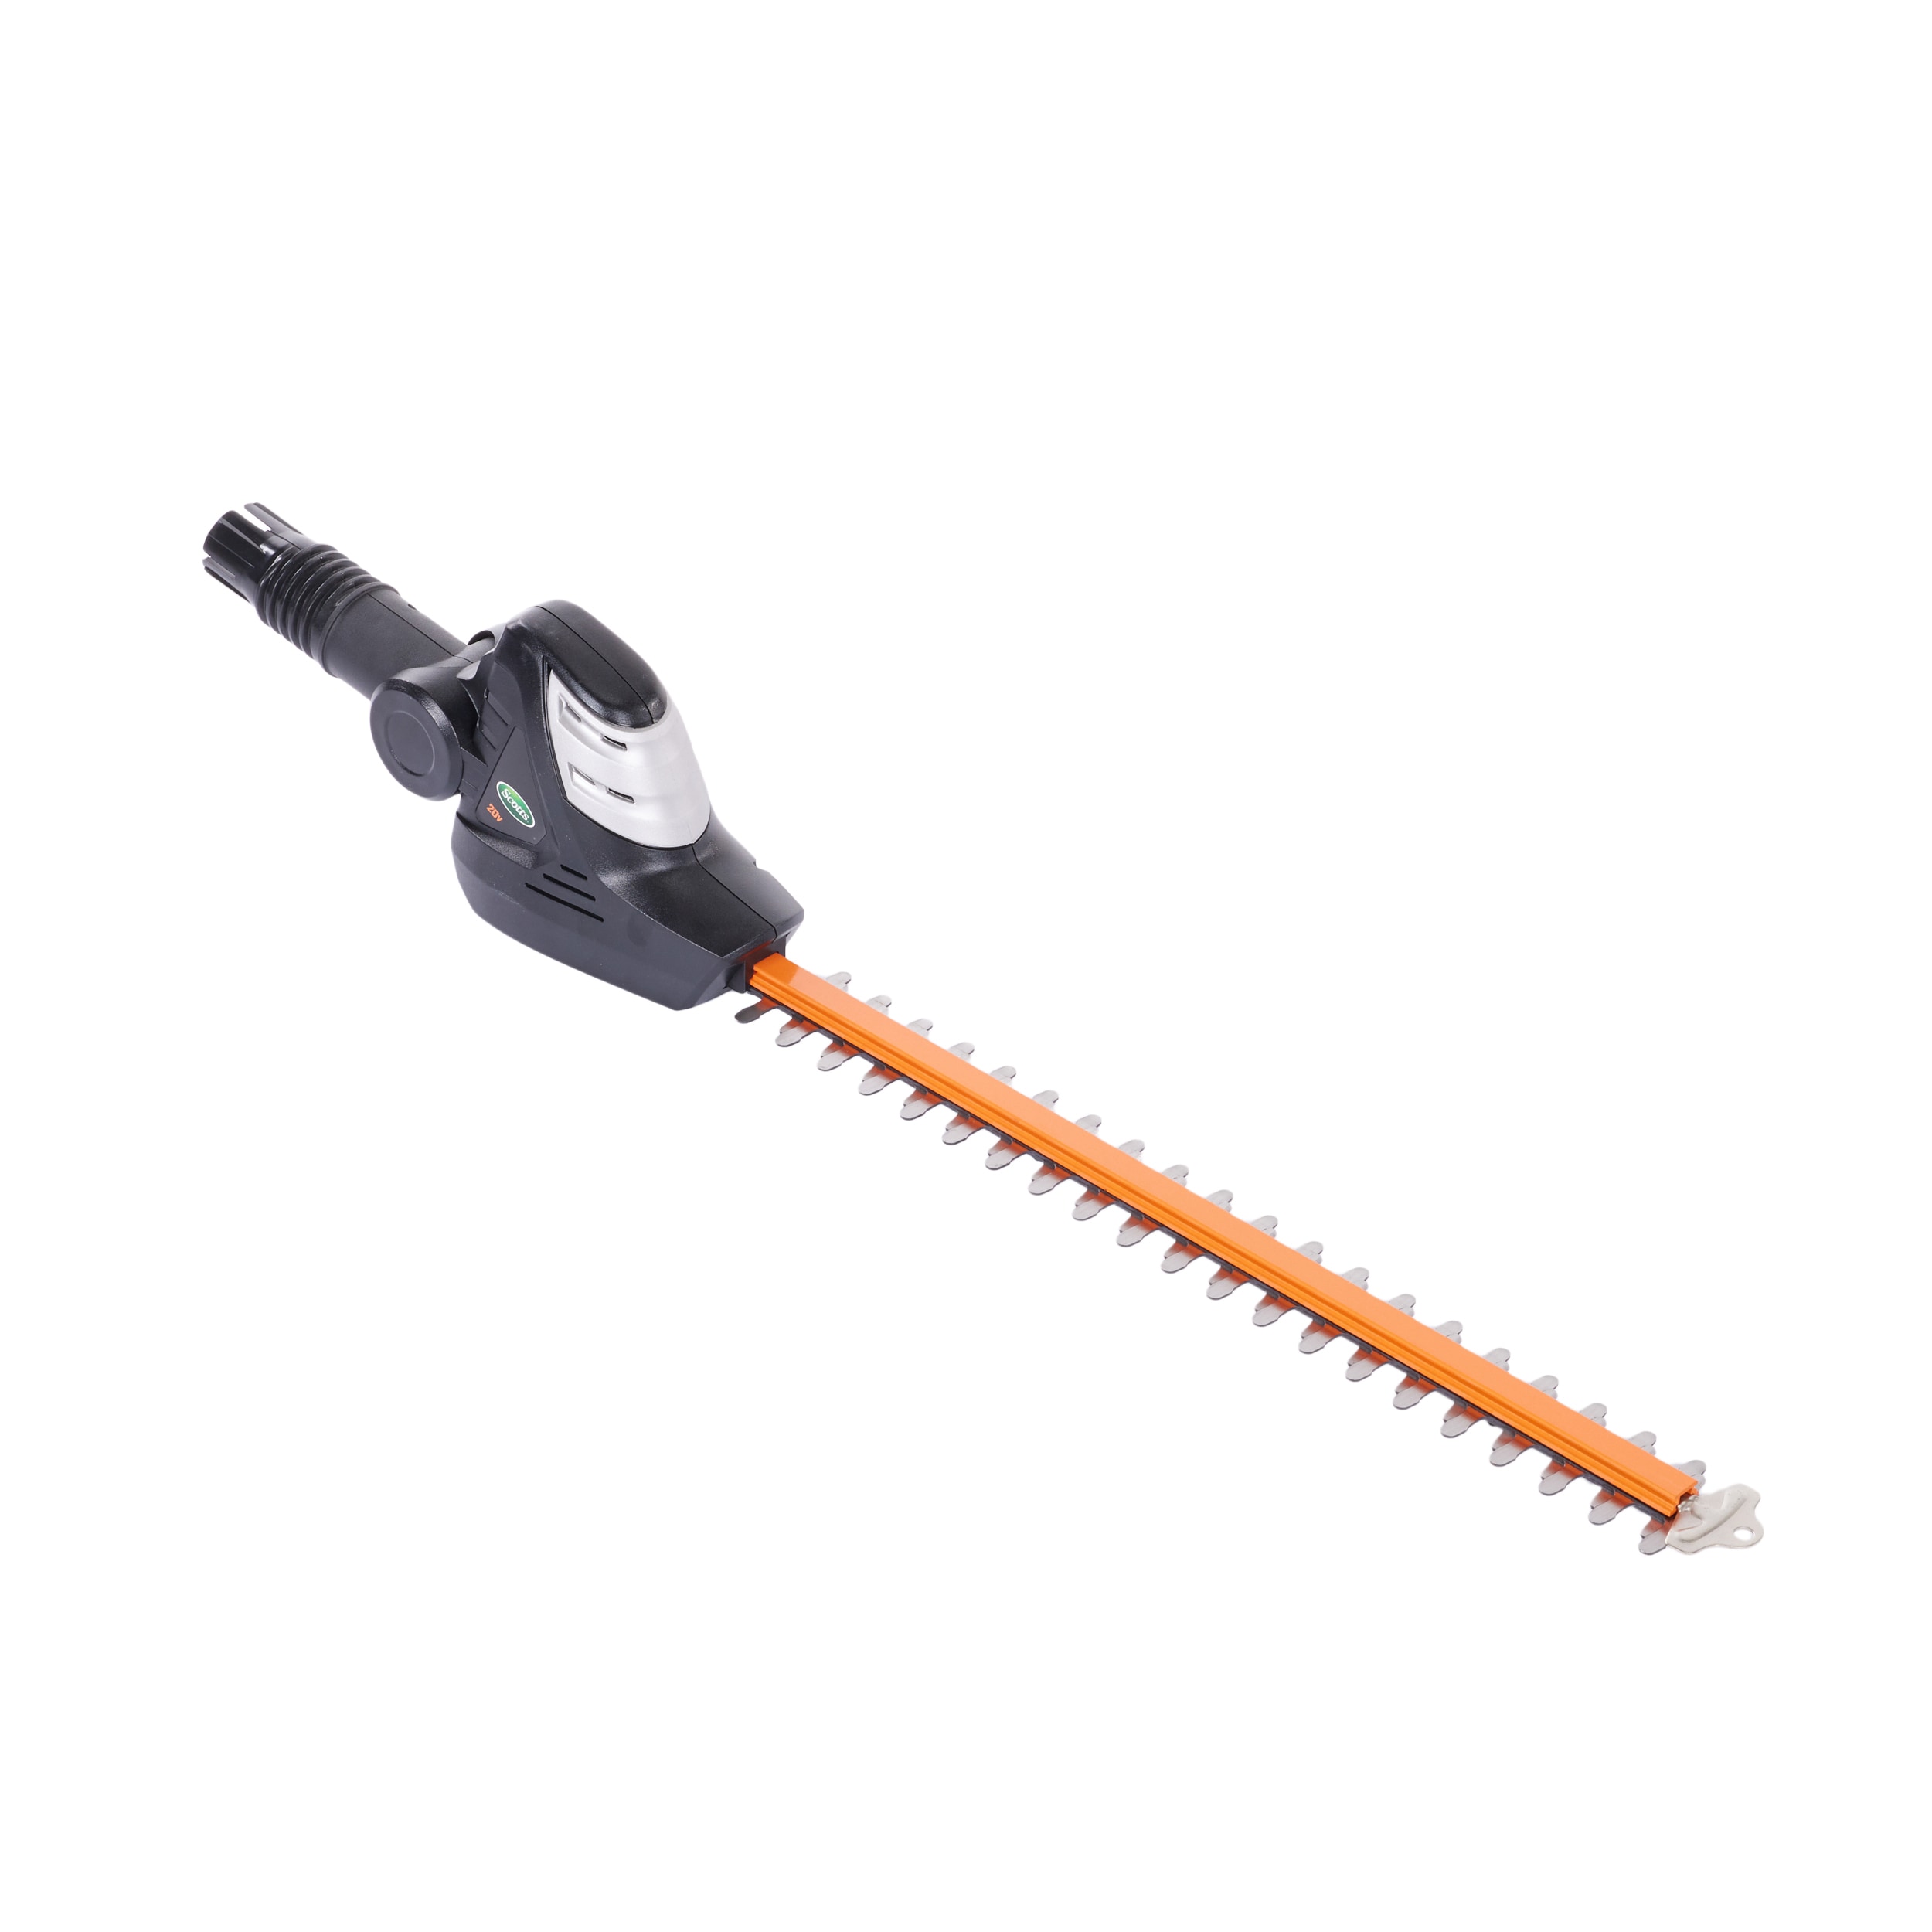 Scotts 15 In. 40 Volt Lithium Ion Cordless String Trimmer - Carr